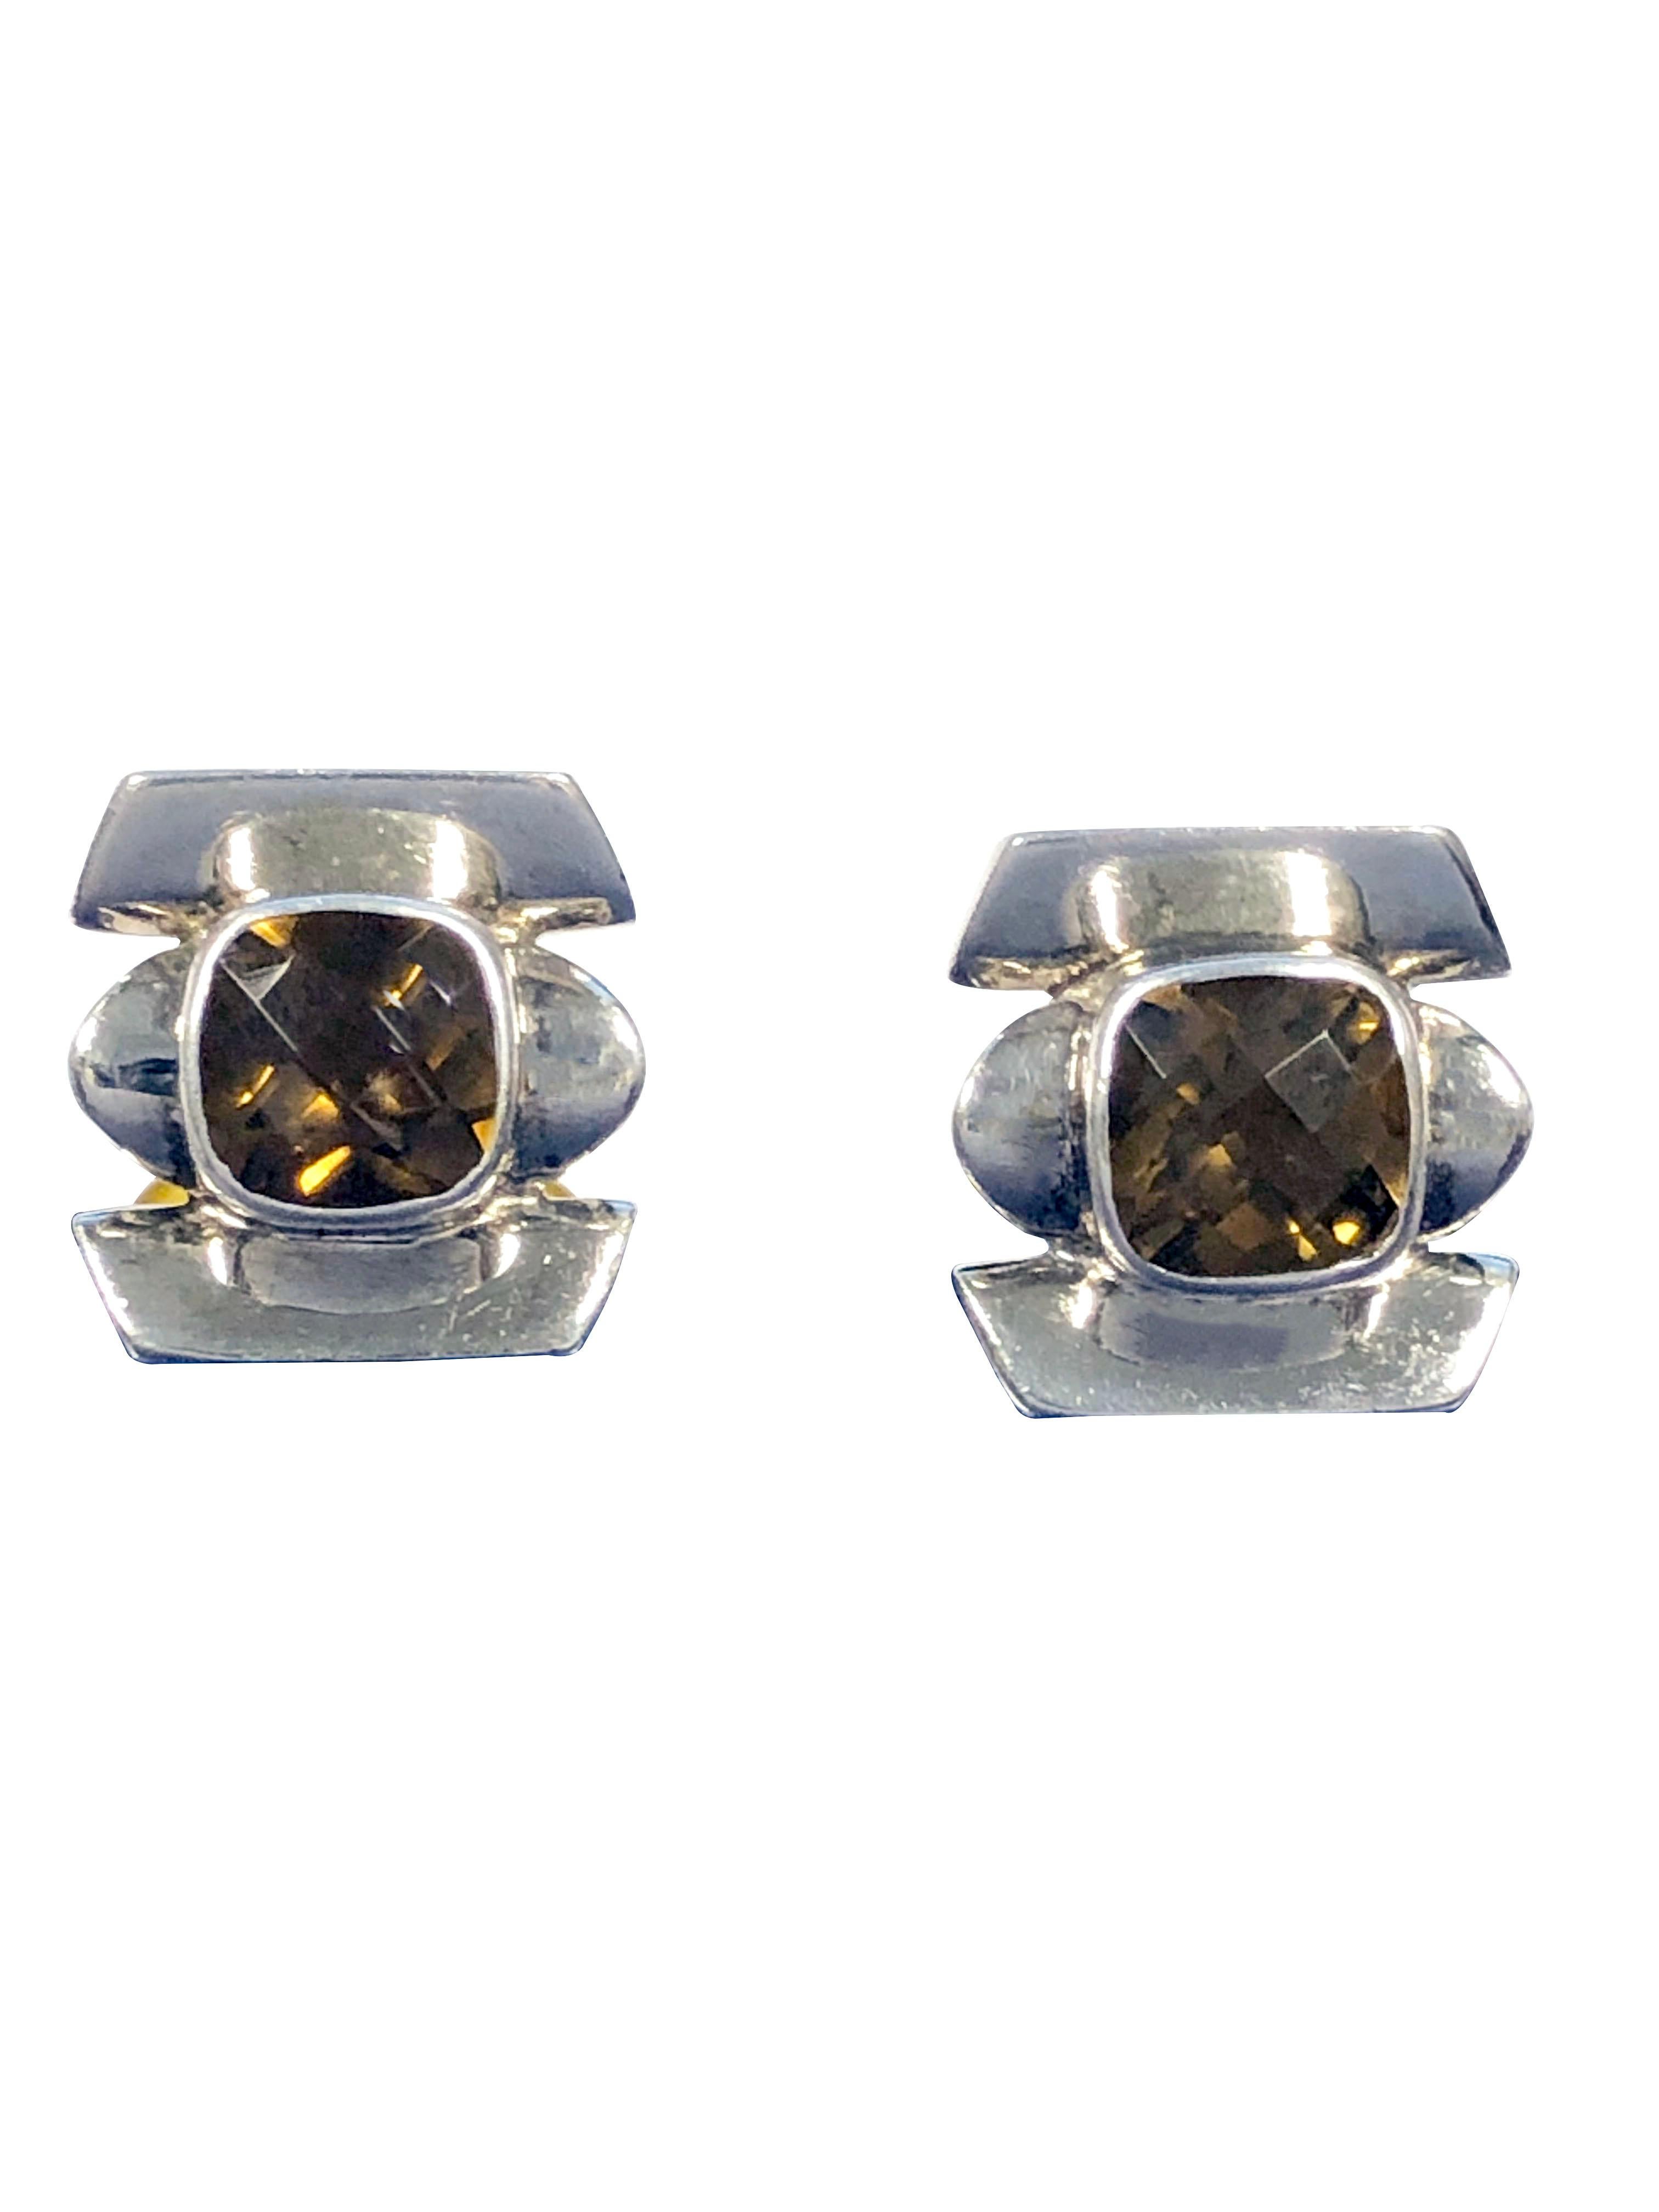 Circa 2018 Sterling Silver Cufflinks by Famed Designer Tracey Mayer, the tops measure 3/4 x 7/8 inch and are centrally set with Cushion shape cross faceted Citrine, the toggle backs are set at the end with a Cabochon Citrine as well. 